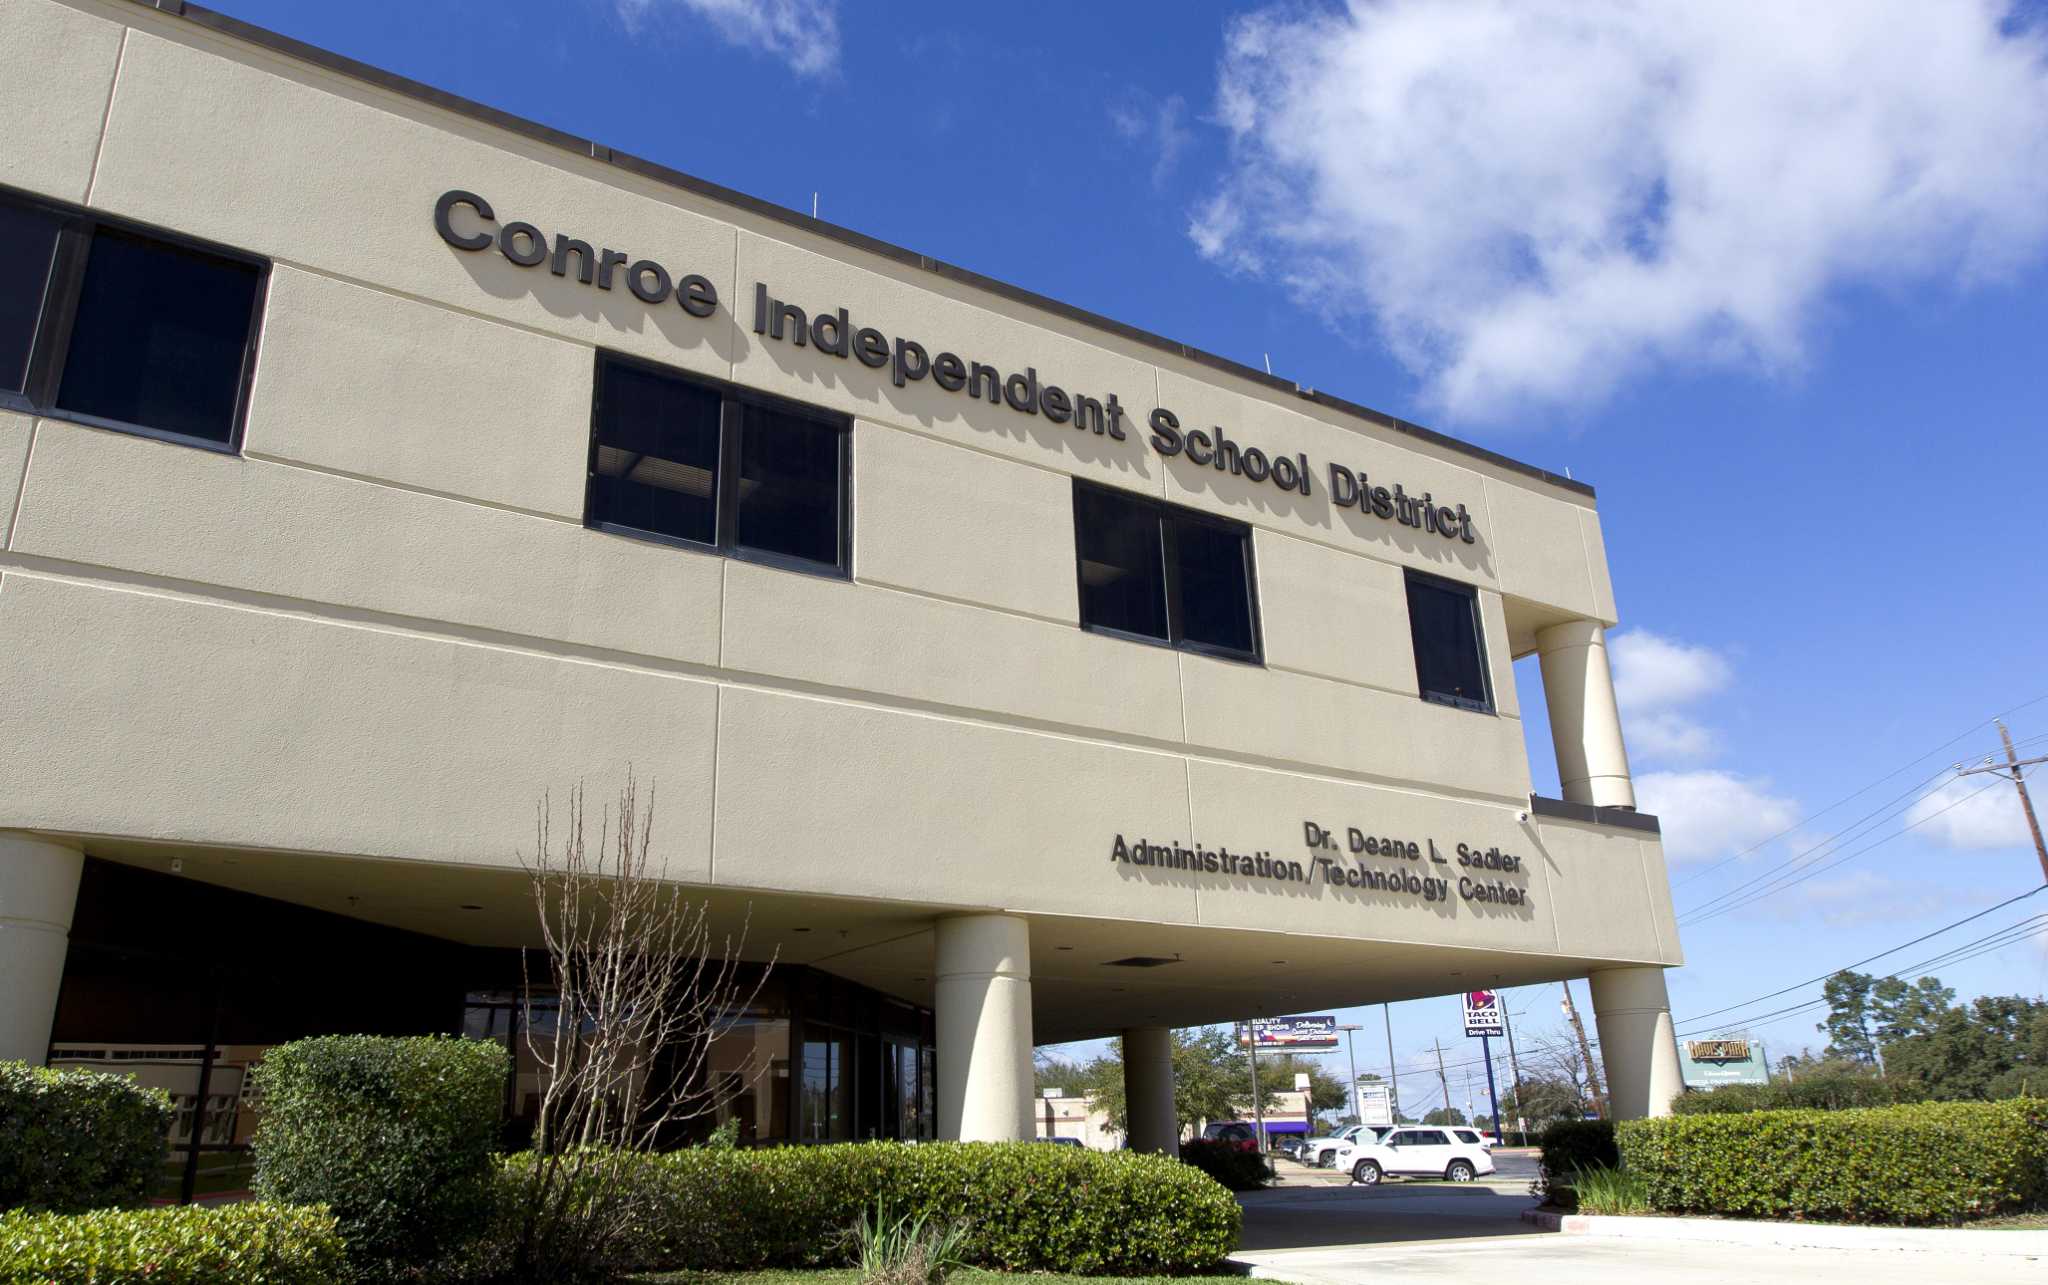 Conroe ISD plans campus renovation work over the summer